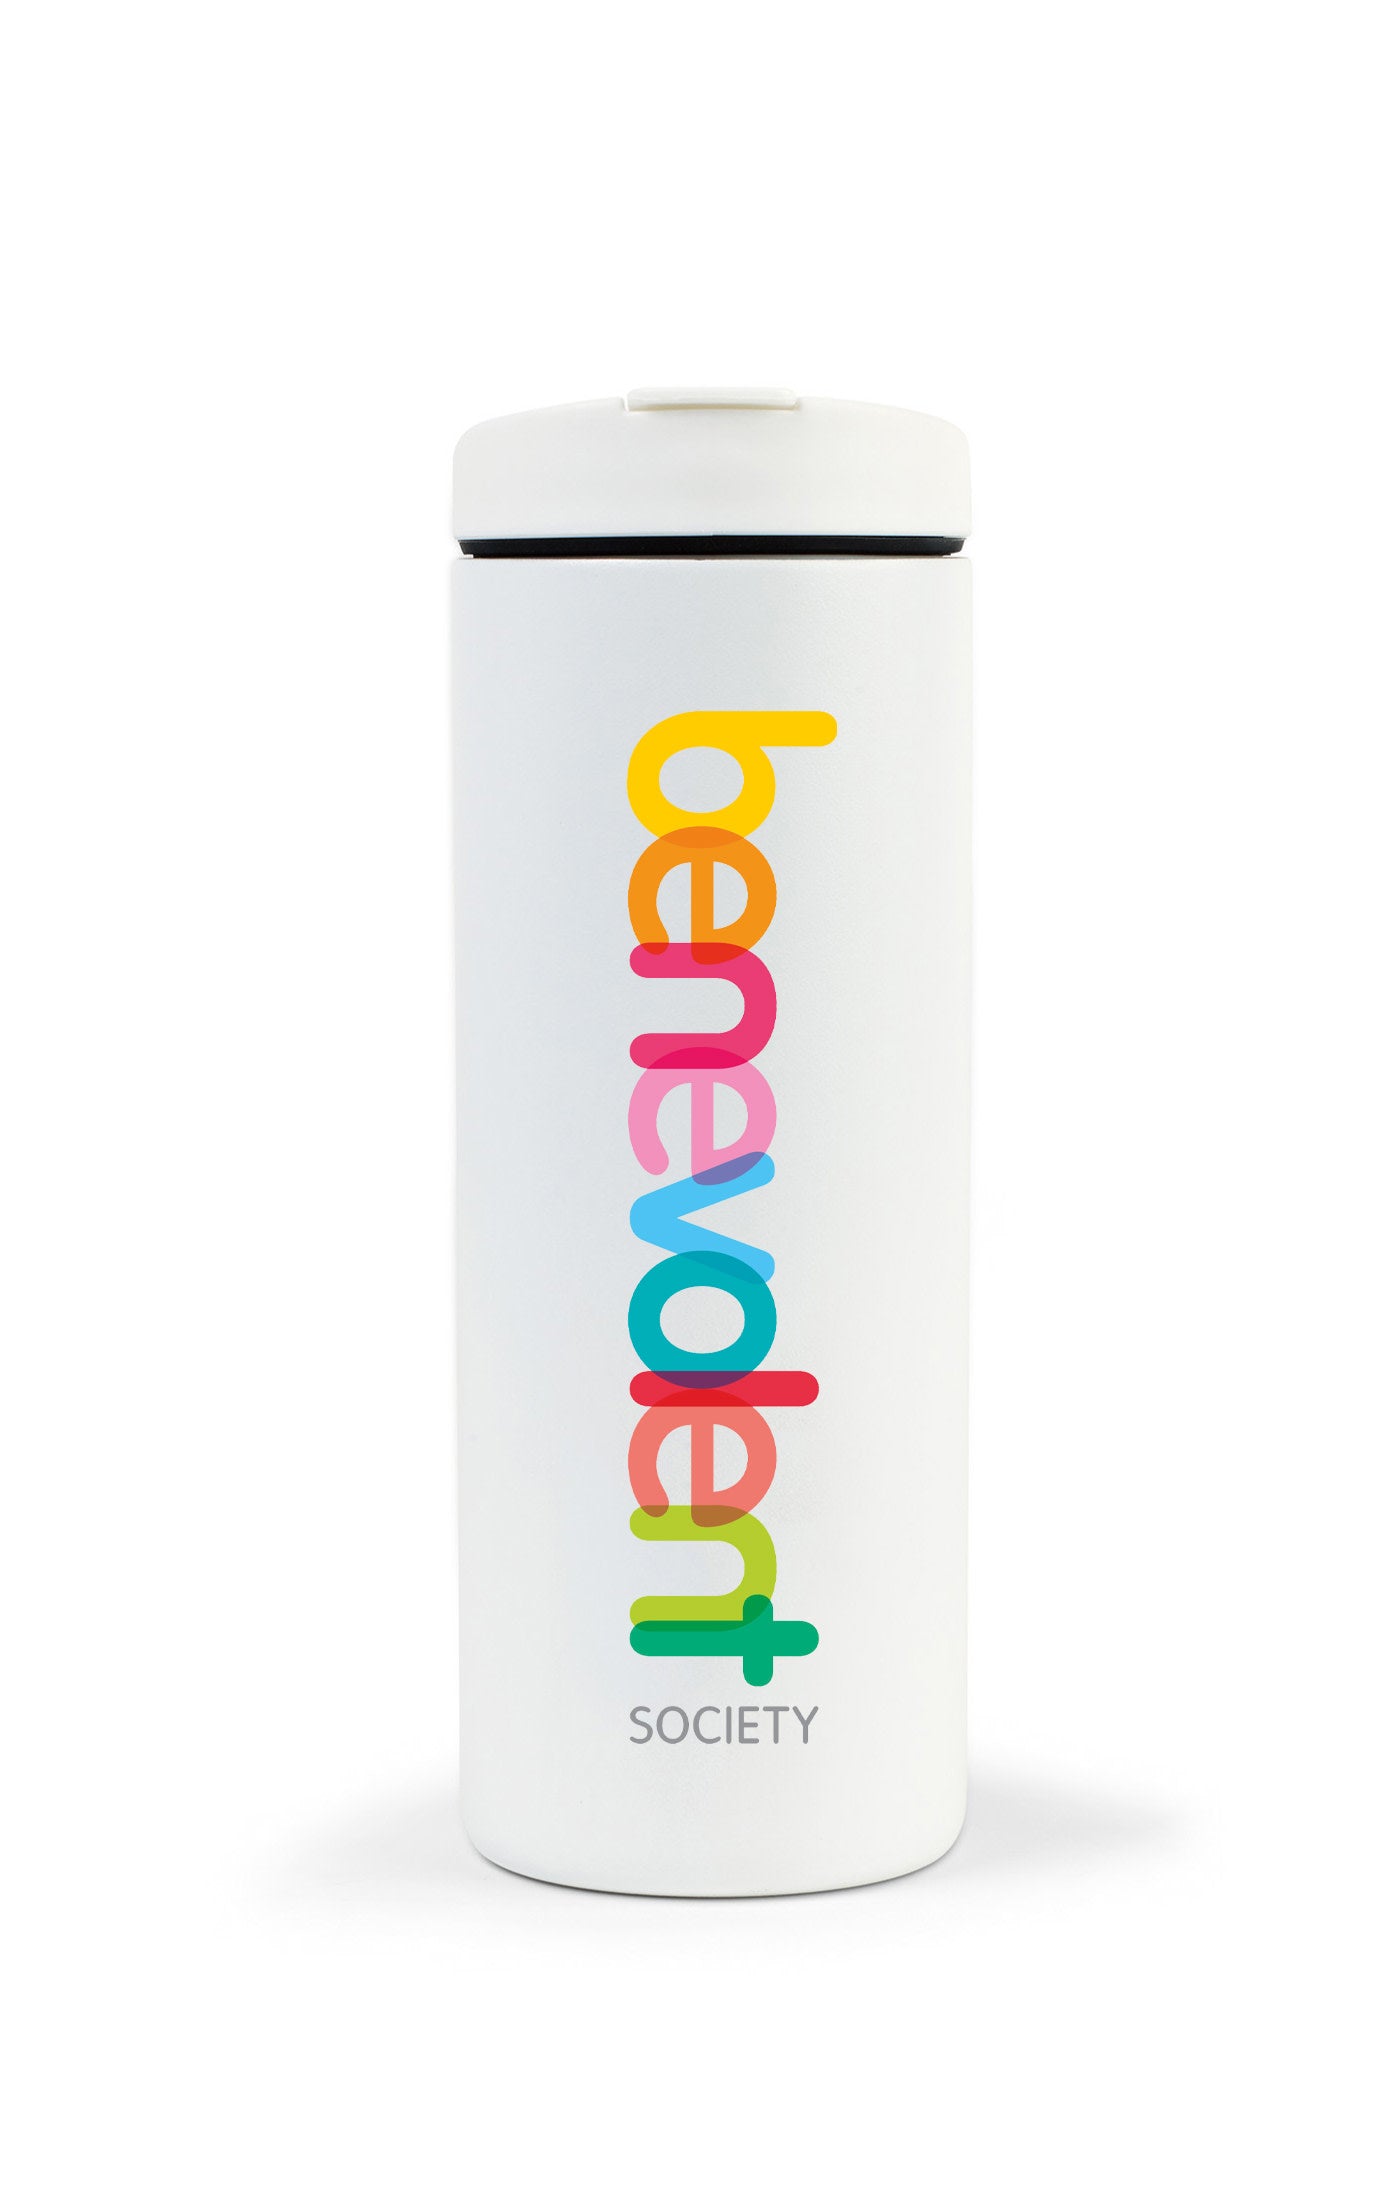 Customizable Miir stainless steel 16oz insulated travel tumbler with logo.